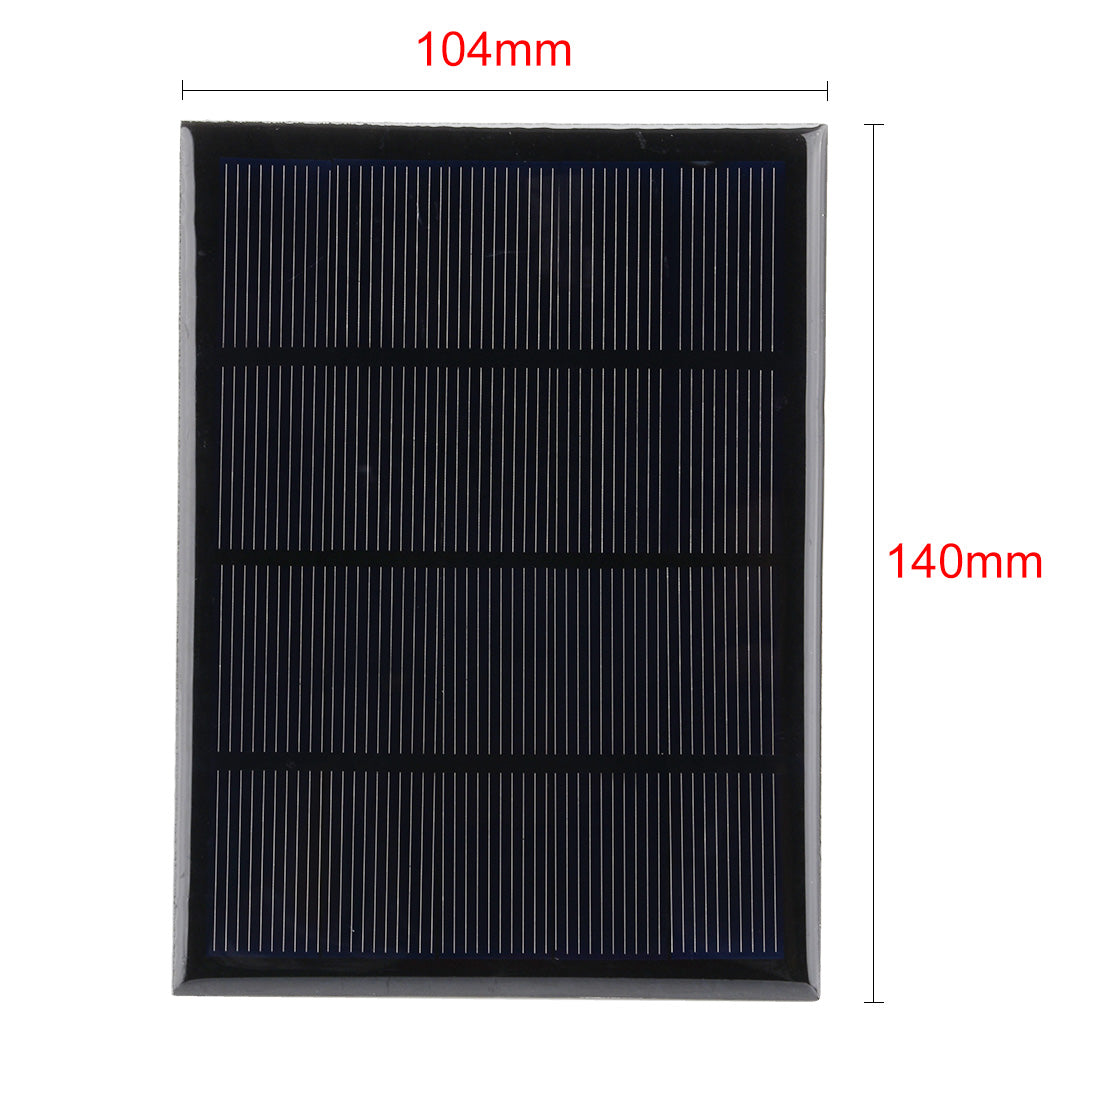 uxcell Uxcell 5Pcs 5V 300mA Poly Mini Solar Cell Panel Module DIY for Light Toys Charger 104mm x 140mm